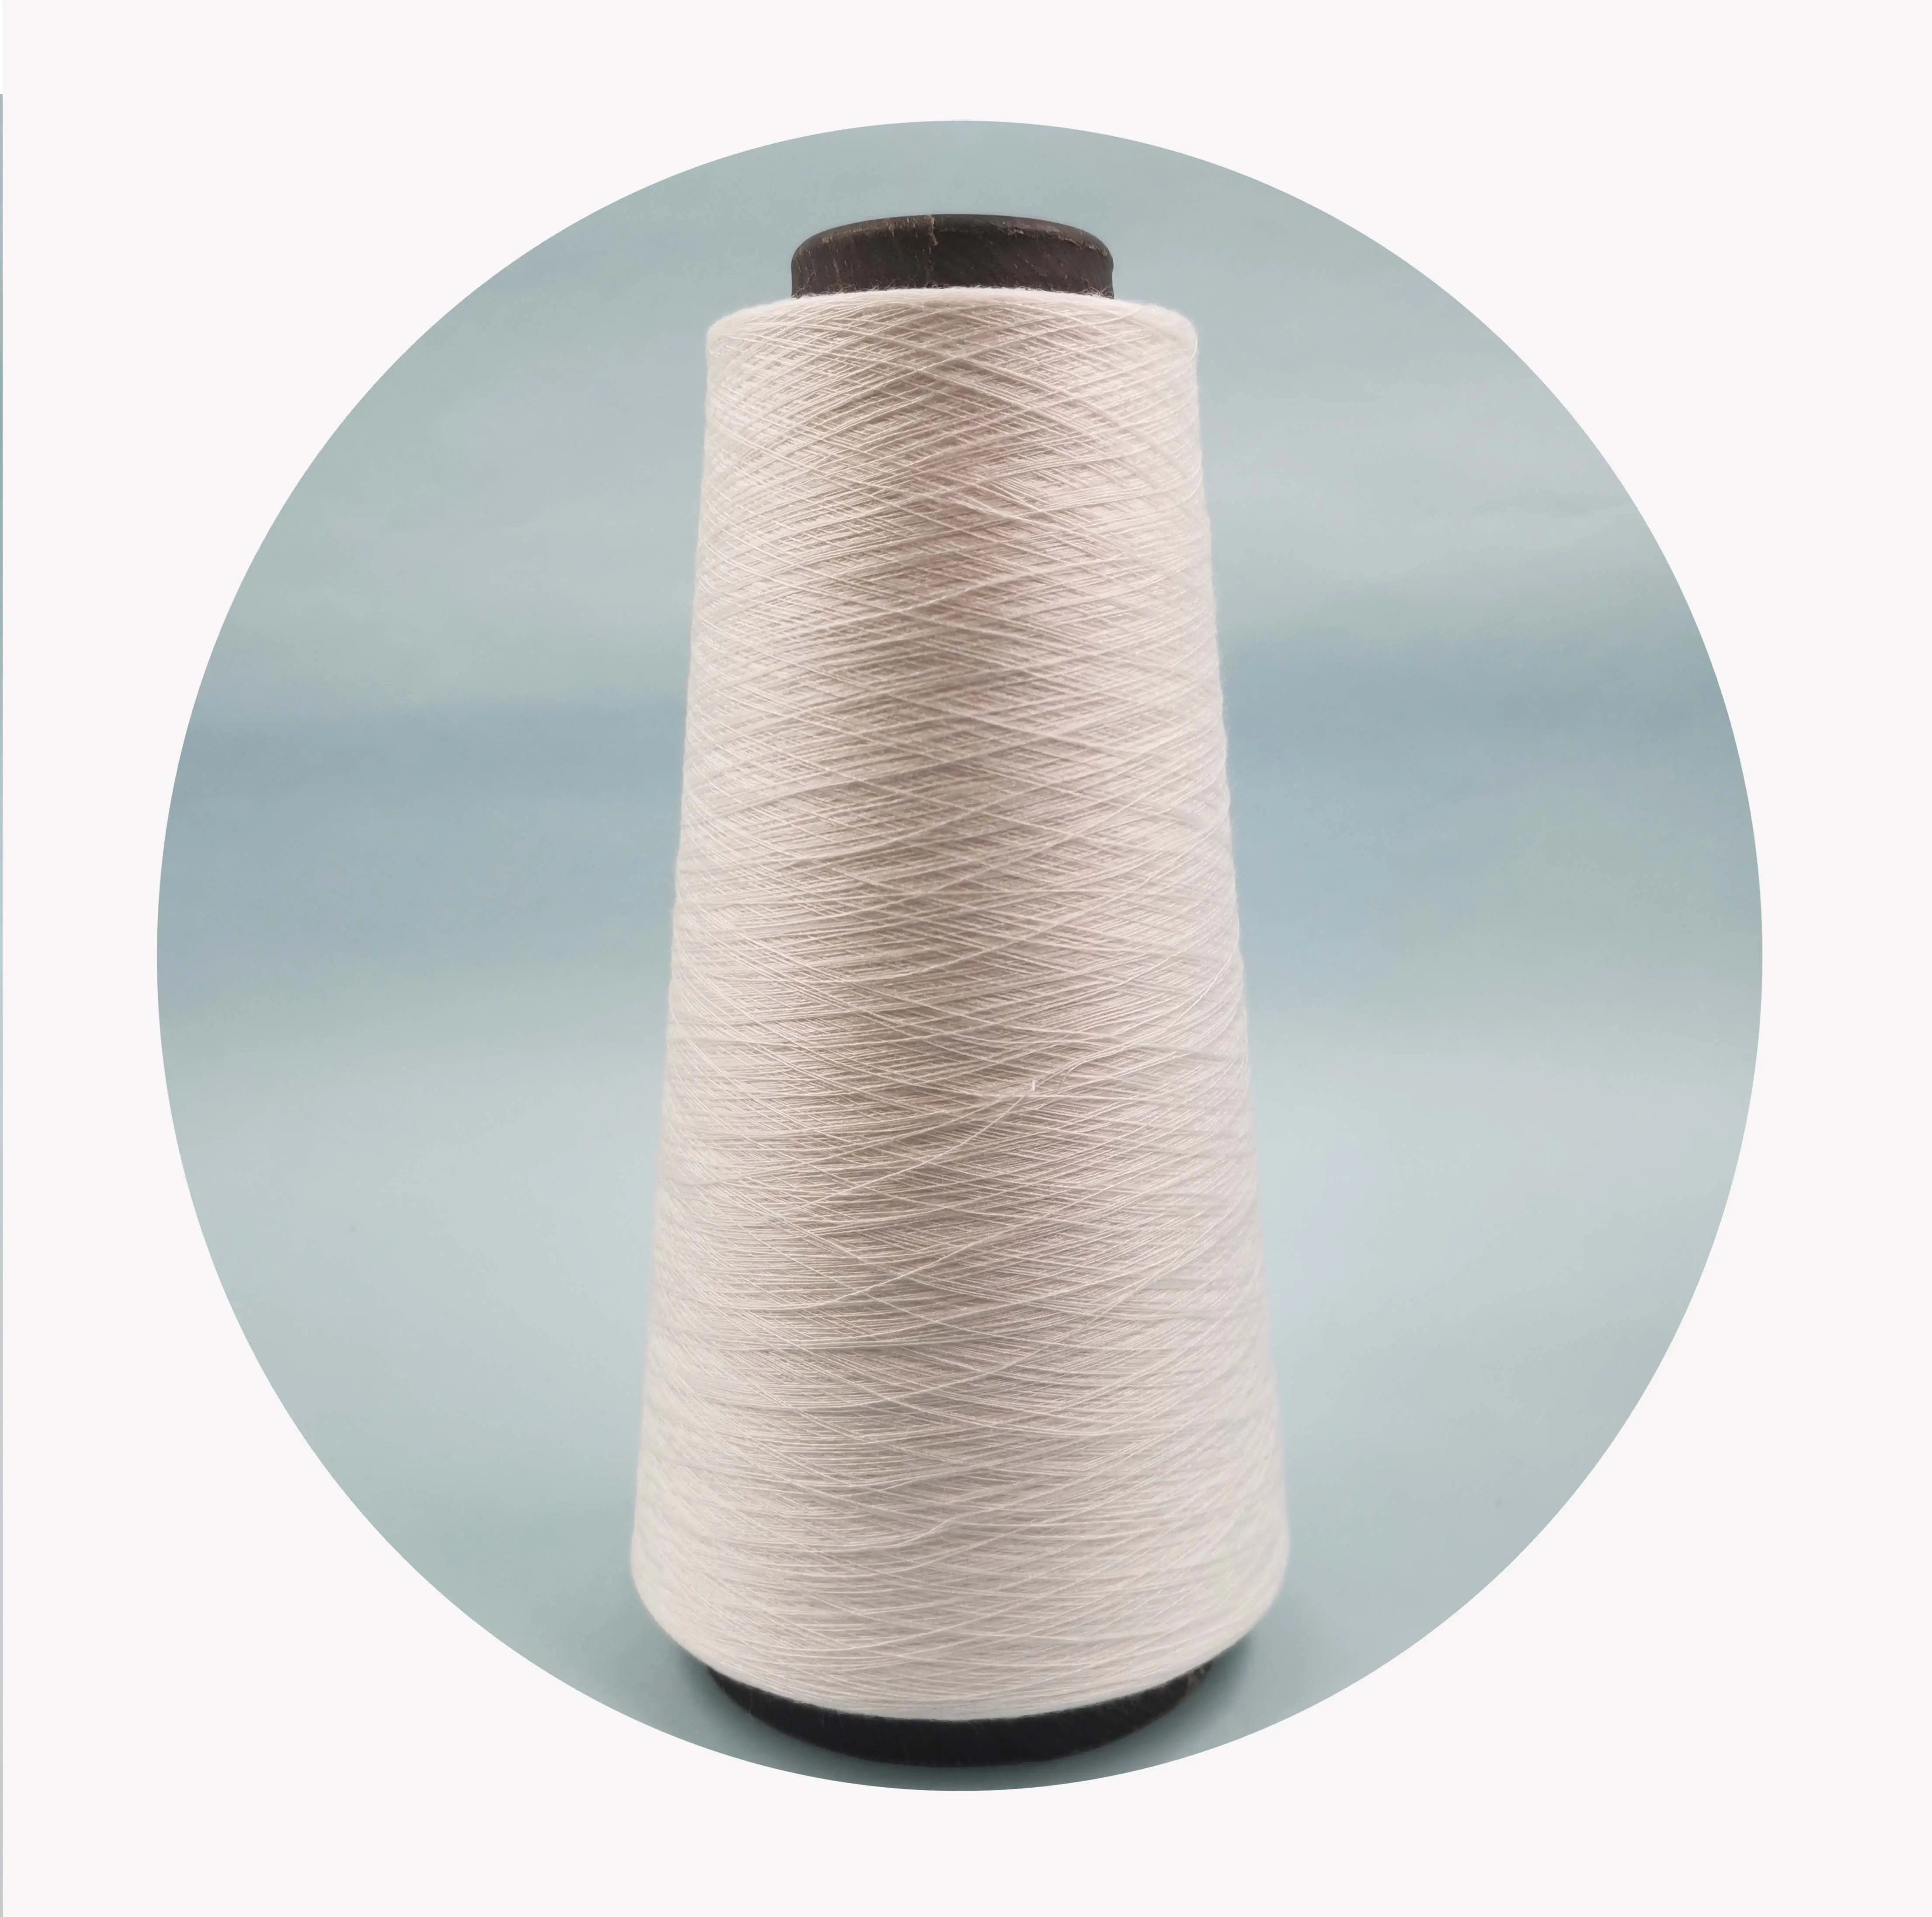 Salable and good quality natural raw white siro compact 100 bamboo yarn for knitting weaving